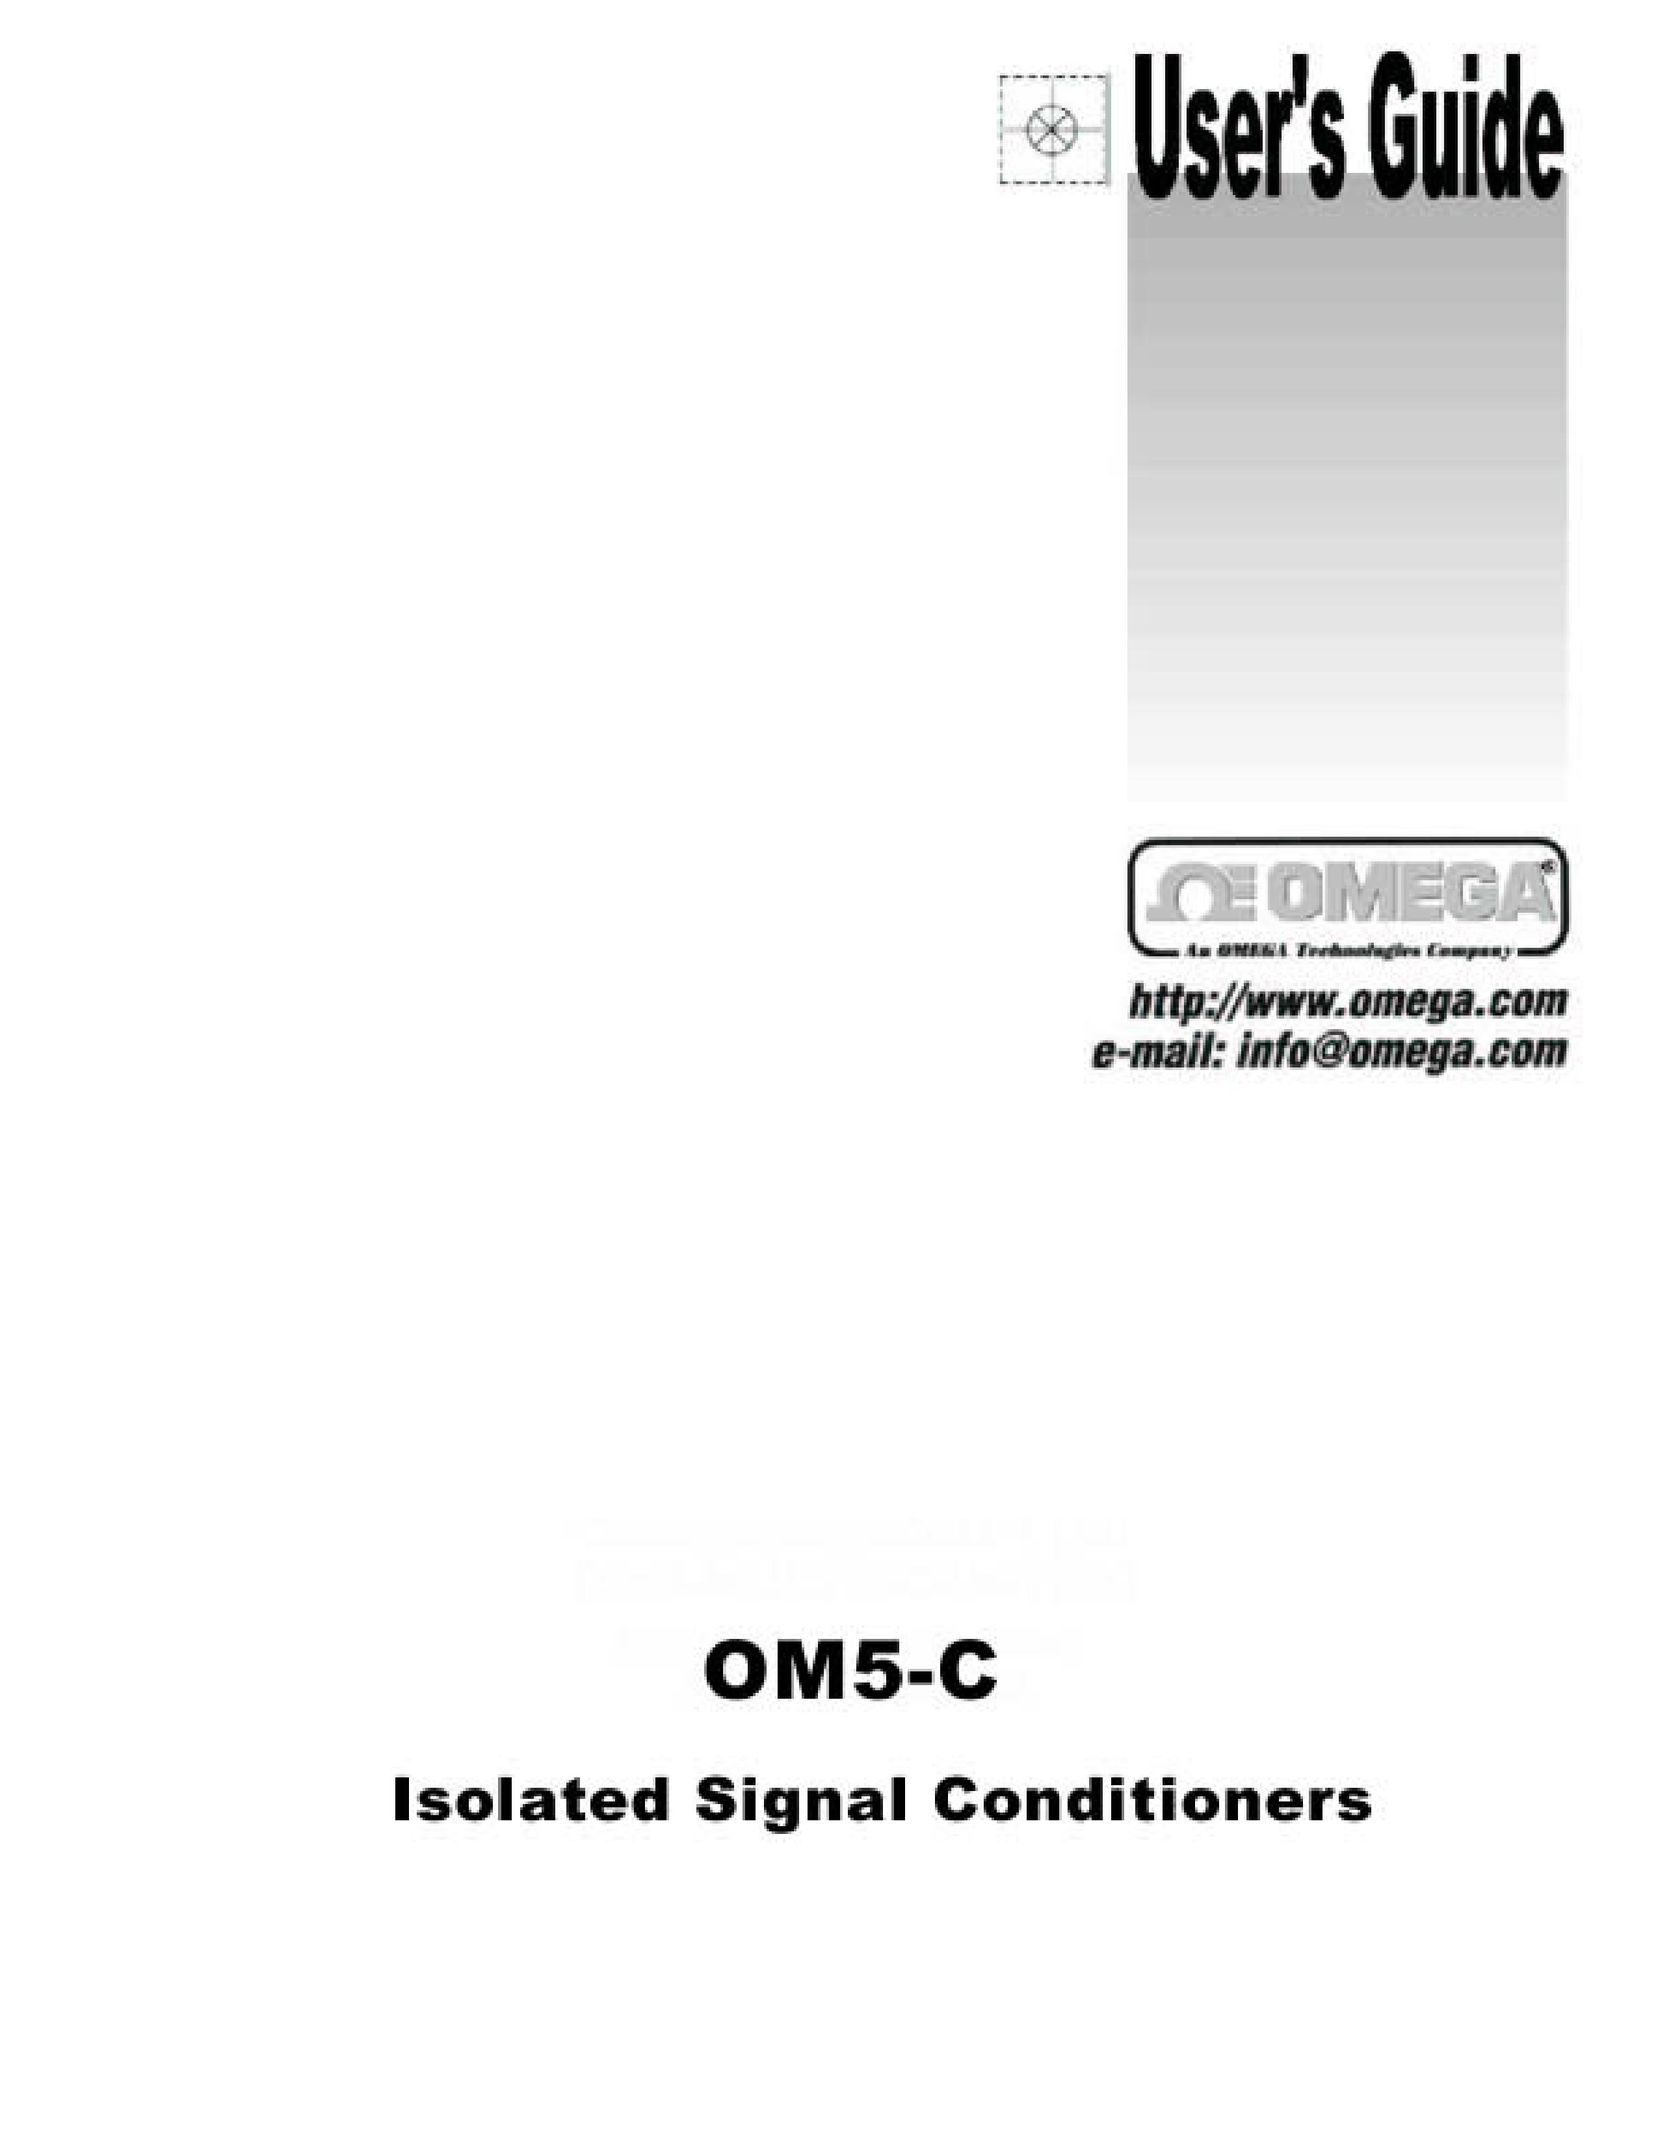 Omega Vehicle Security OM5-C Electric Heater User Manual